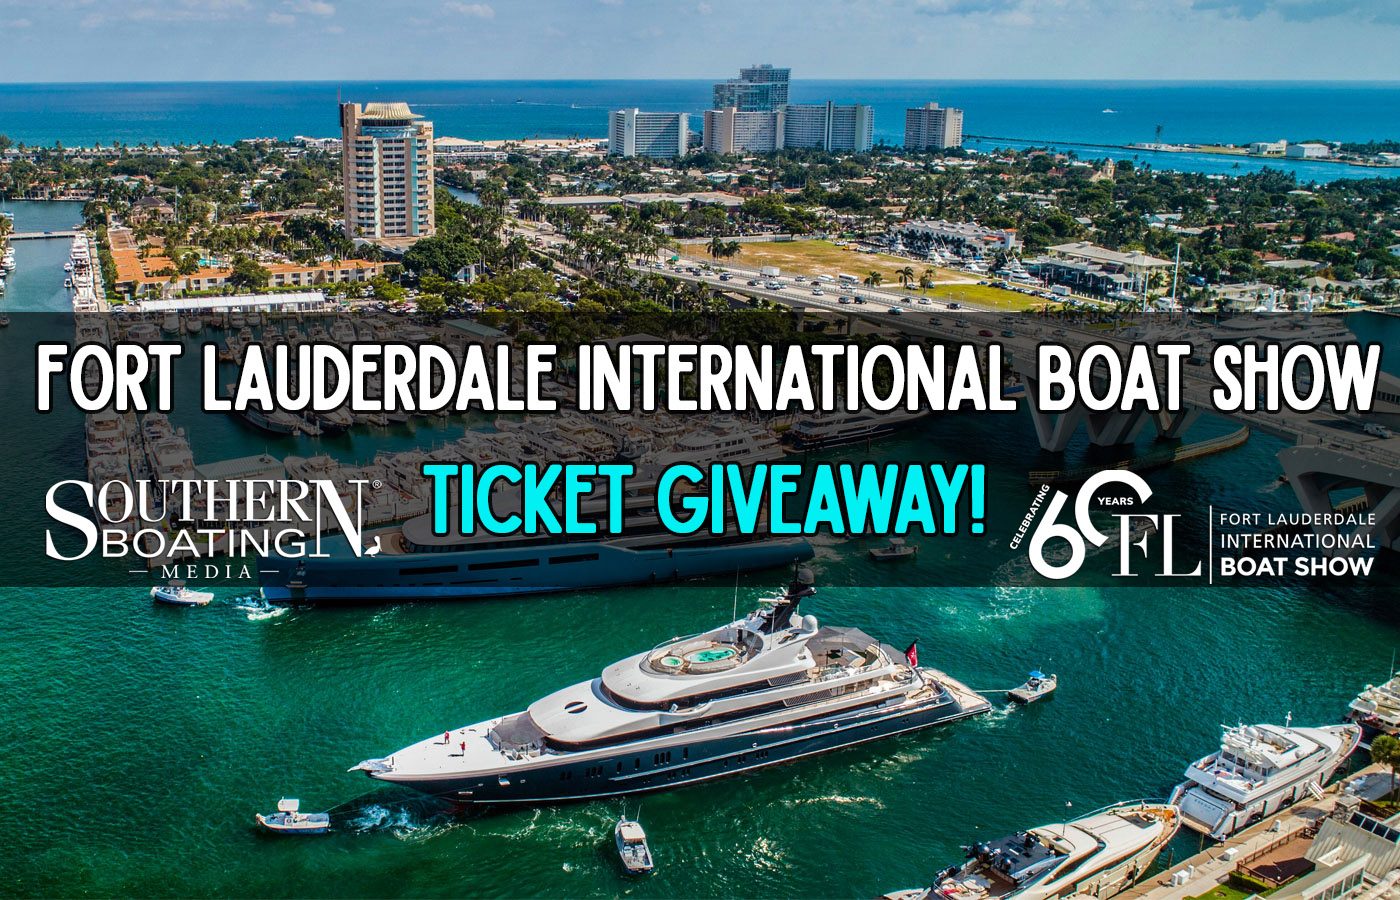 The 60th Annual Fort Lauderdale Boat Show Southern Boating